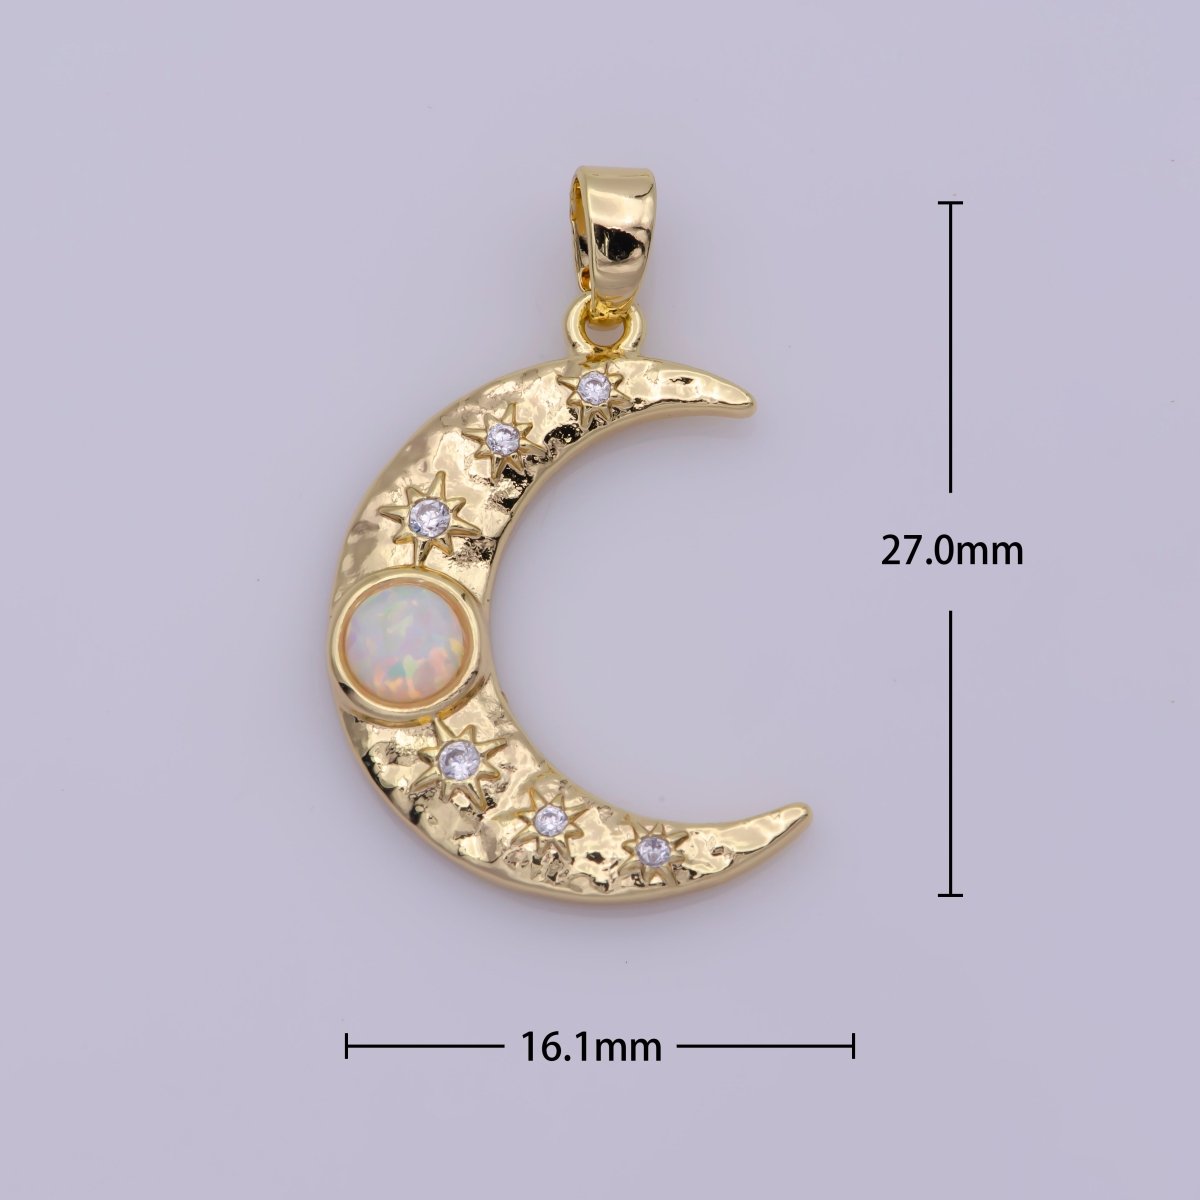 Dainty Moon Pendant Gold Moon with Opal Stone Pendant Necklace, Celestial Jewelry Opal Stone Necklace Star Charm N-493 N-494 - DLUXCA